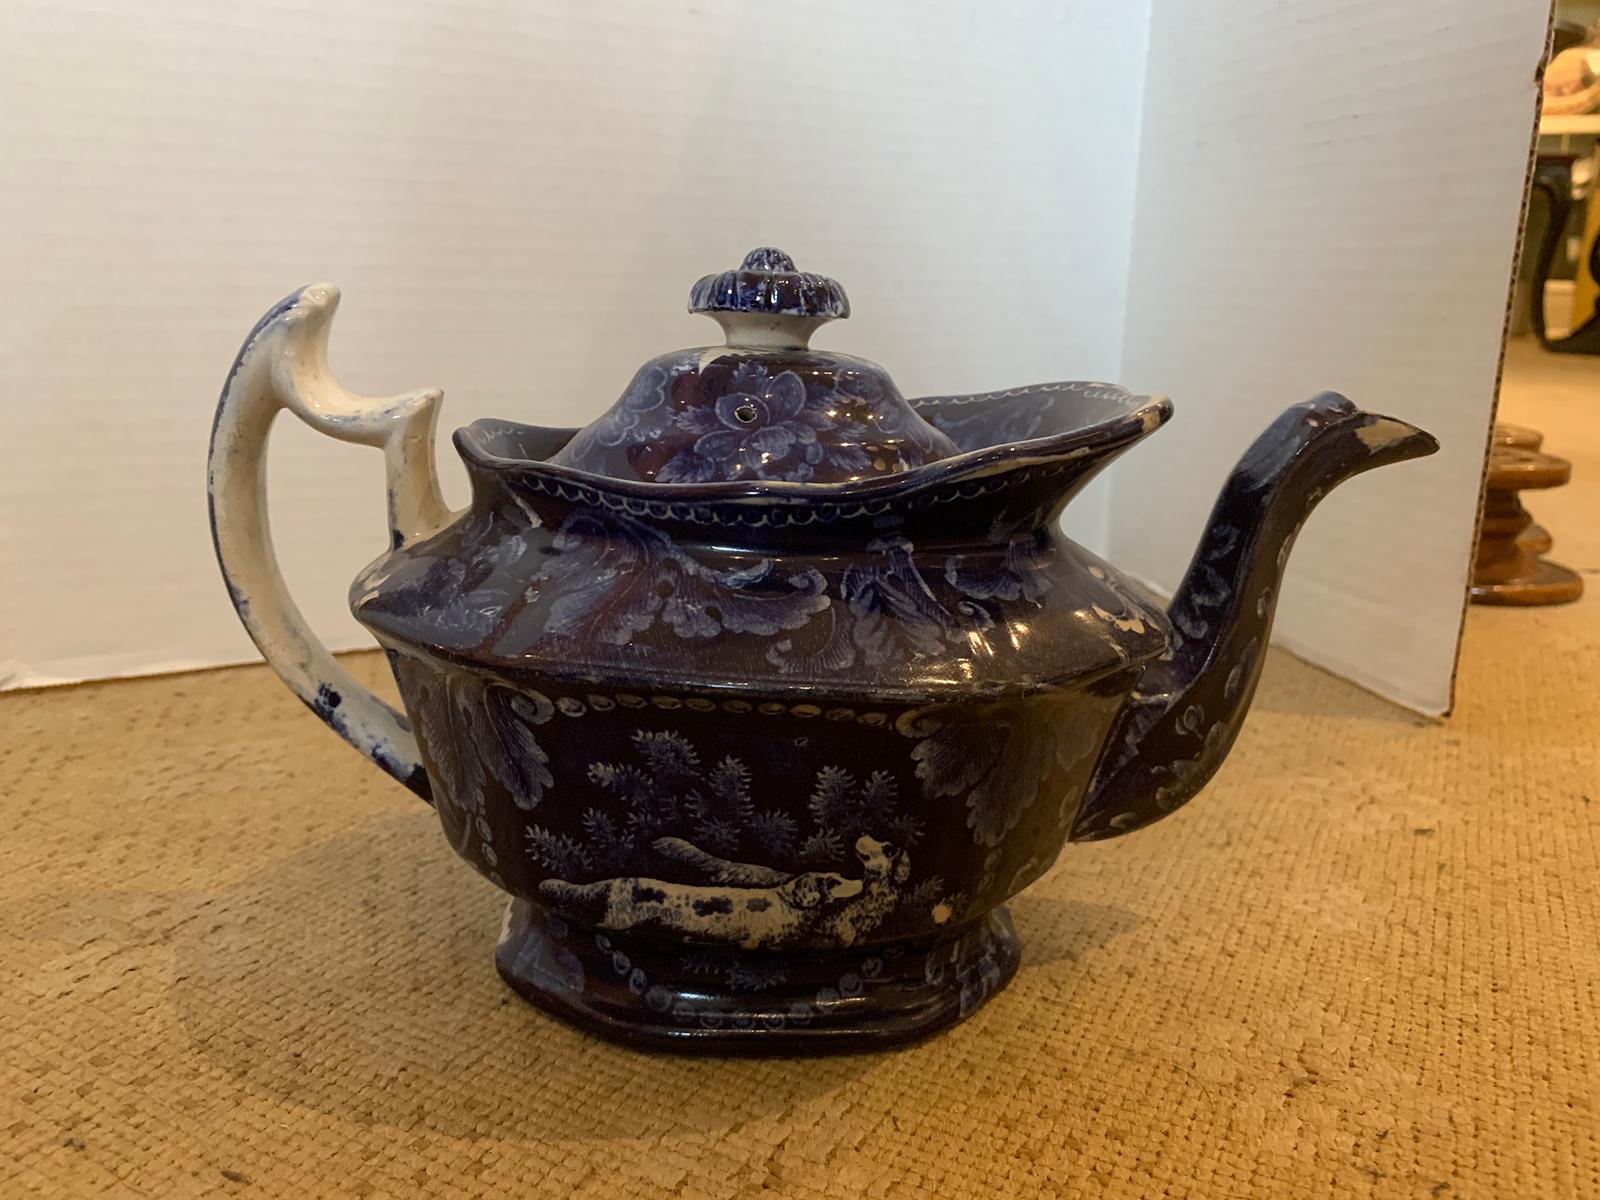 Glazed Ralph & James Clews Marked English Staffordshire Transferware Teapot, circa 1825 For Sale